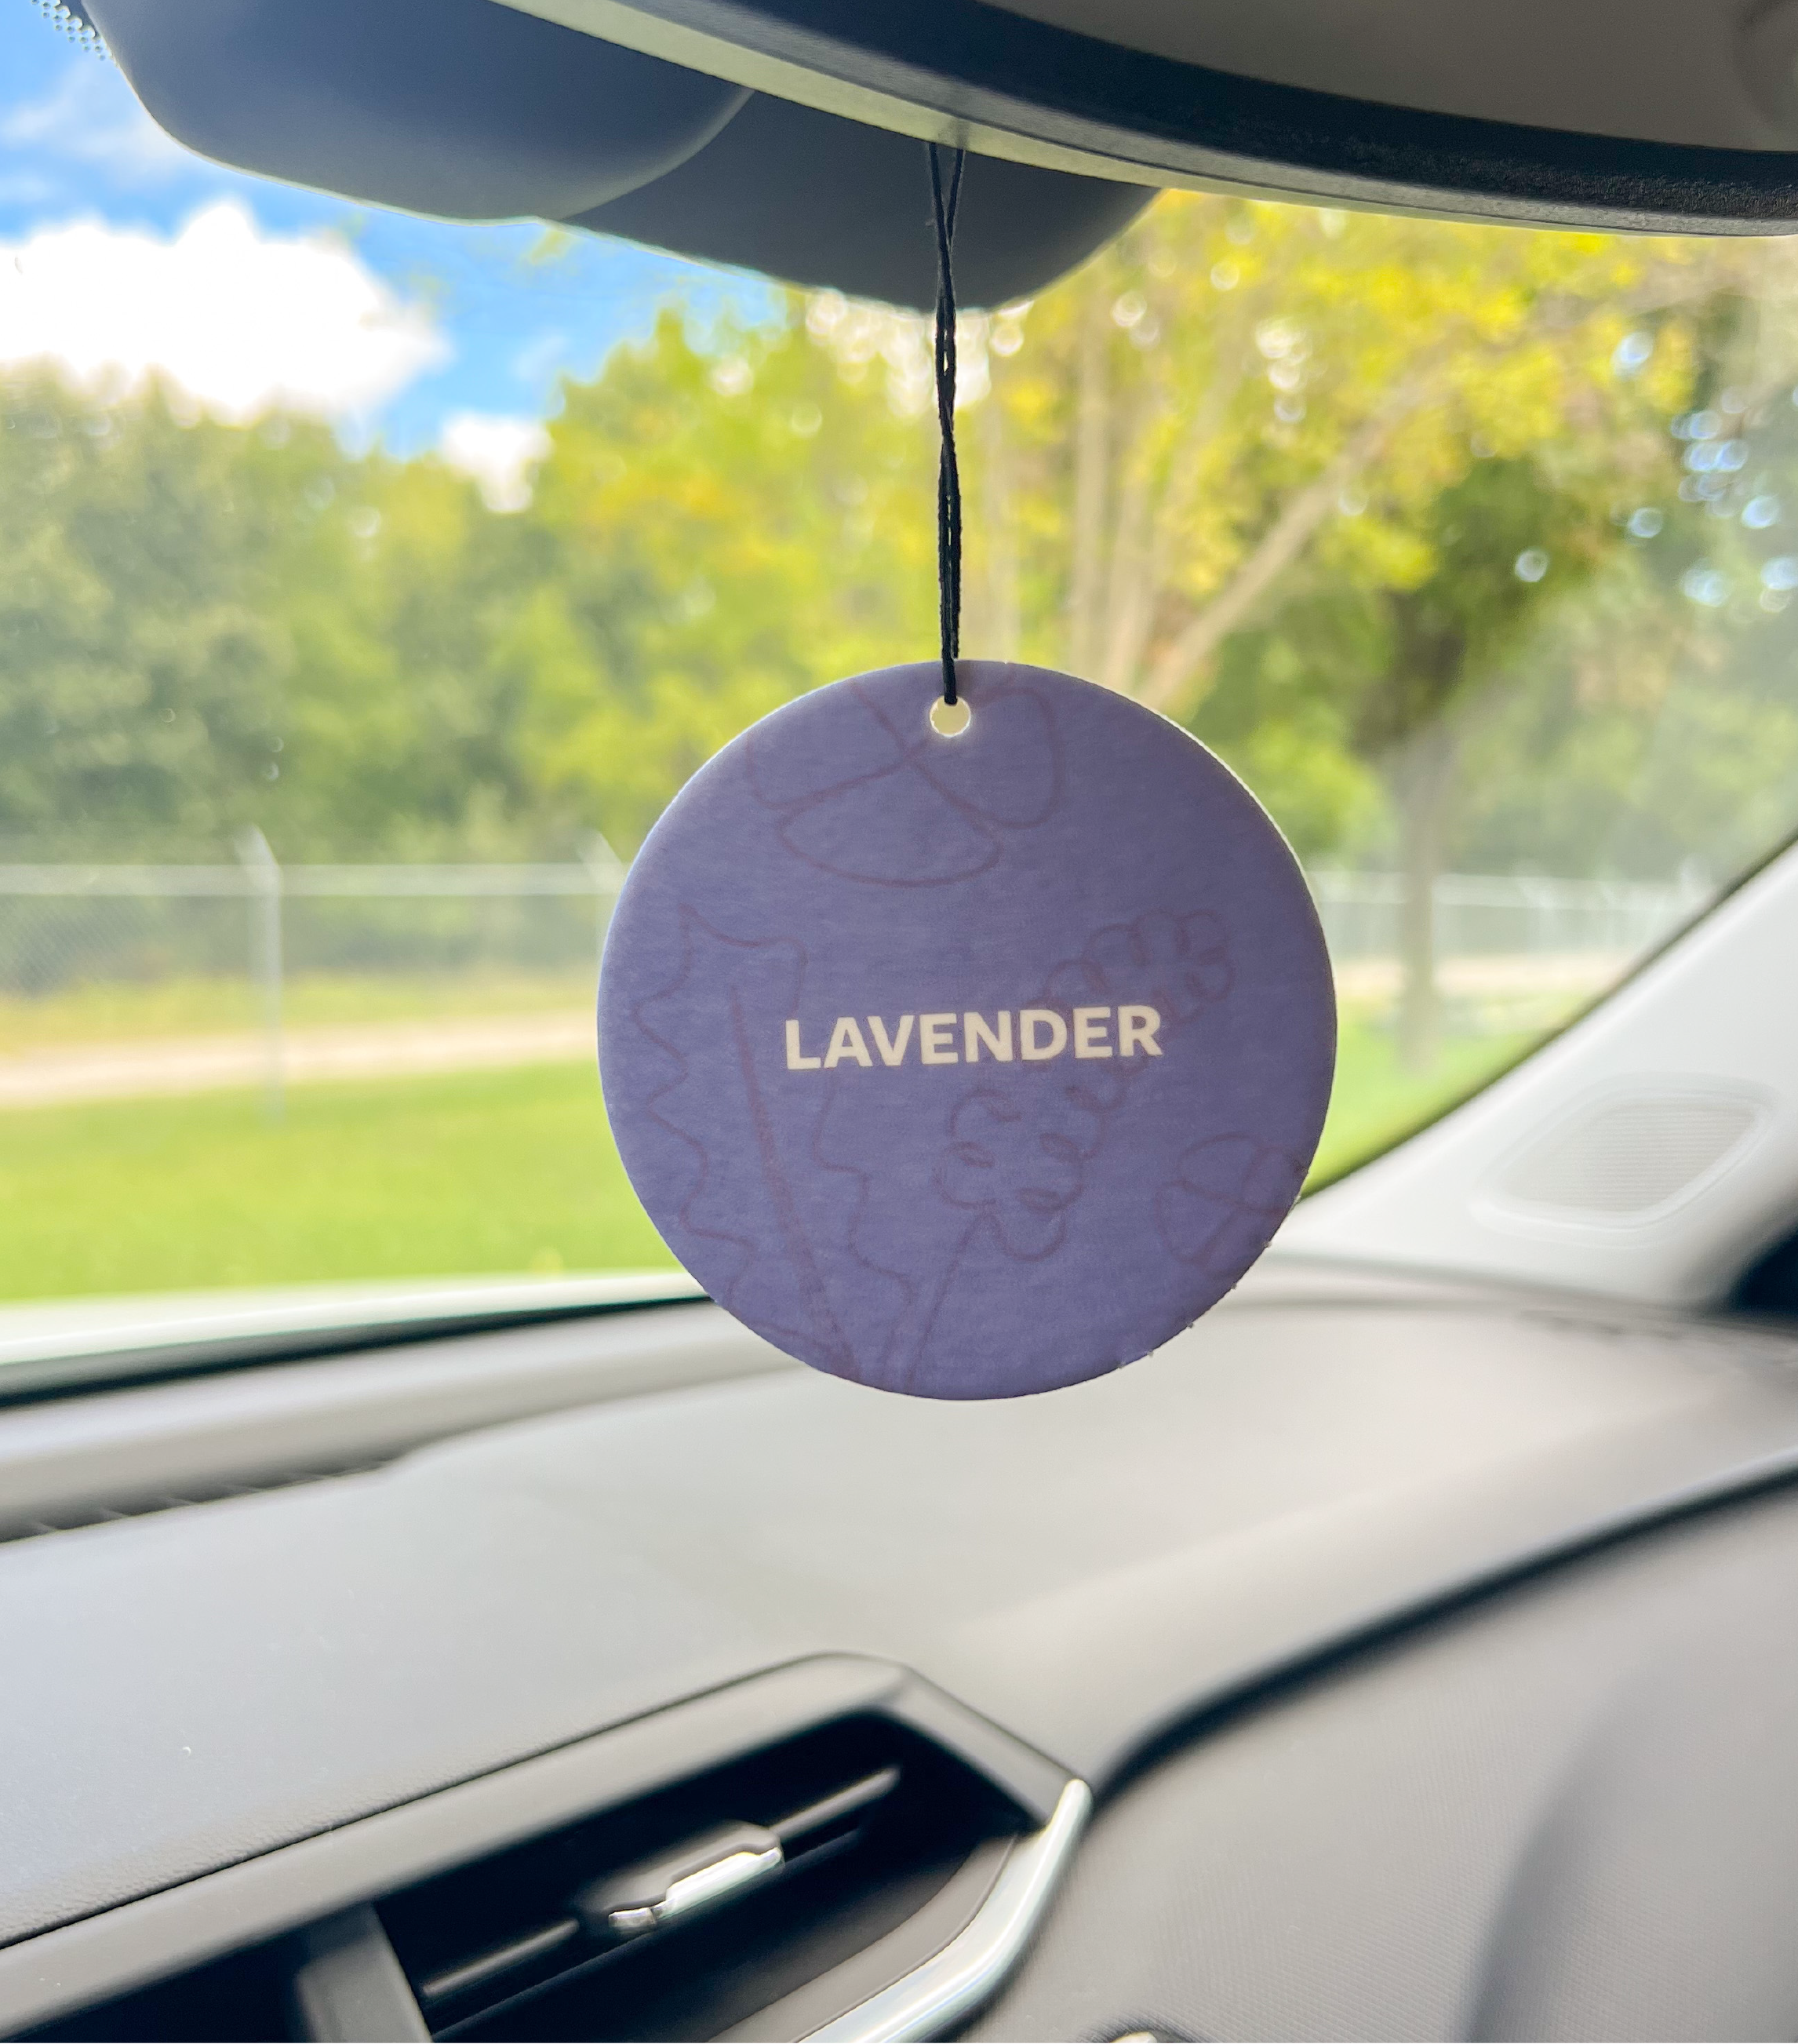 The front of a lavender car freshener hanging in a car.